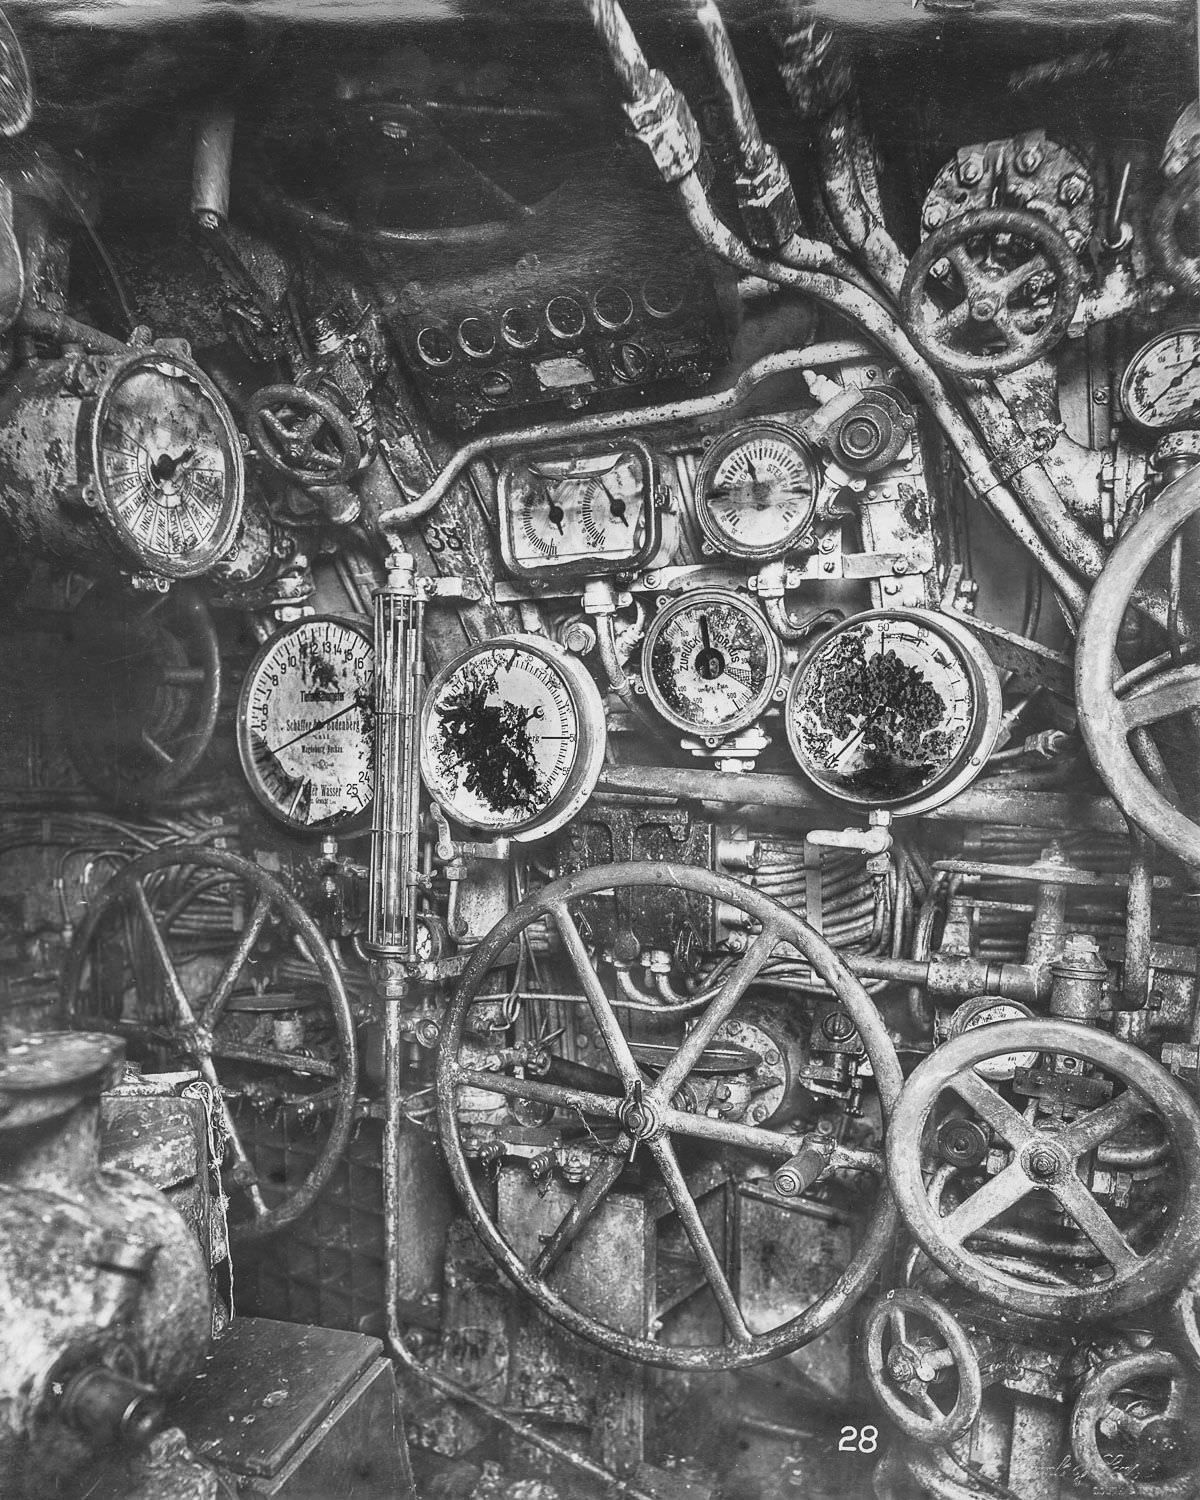 Control room looking forward. The depth gauge, engine telegraphs, wheels for flooding and blowing, and hydroplane controls are visible.